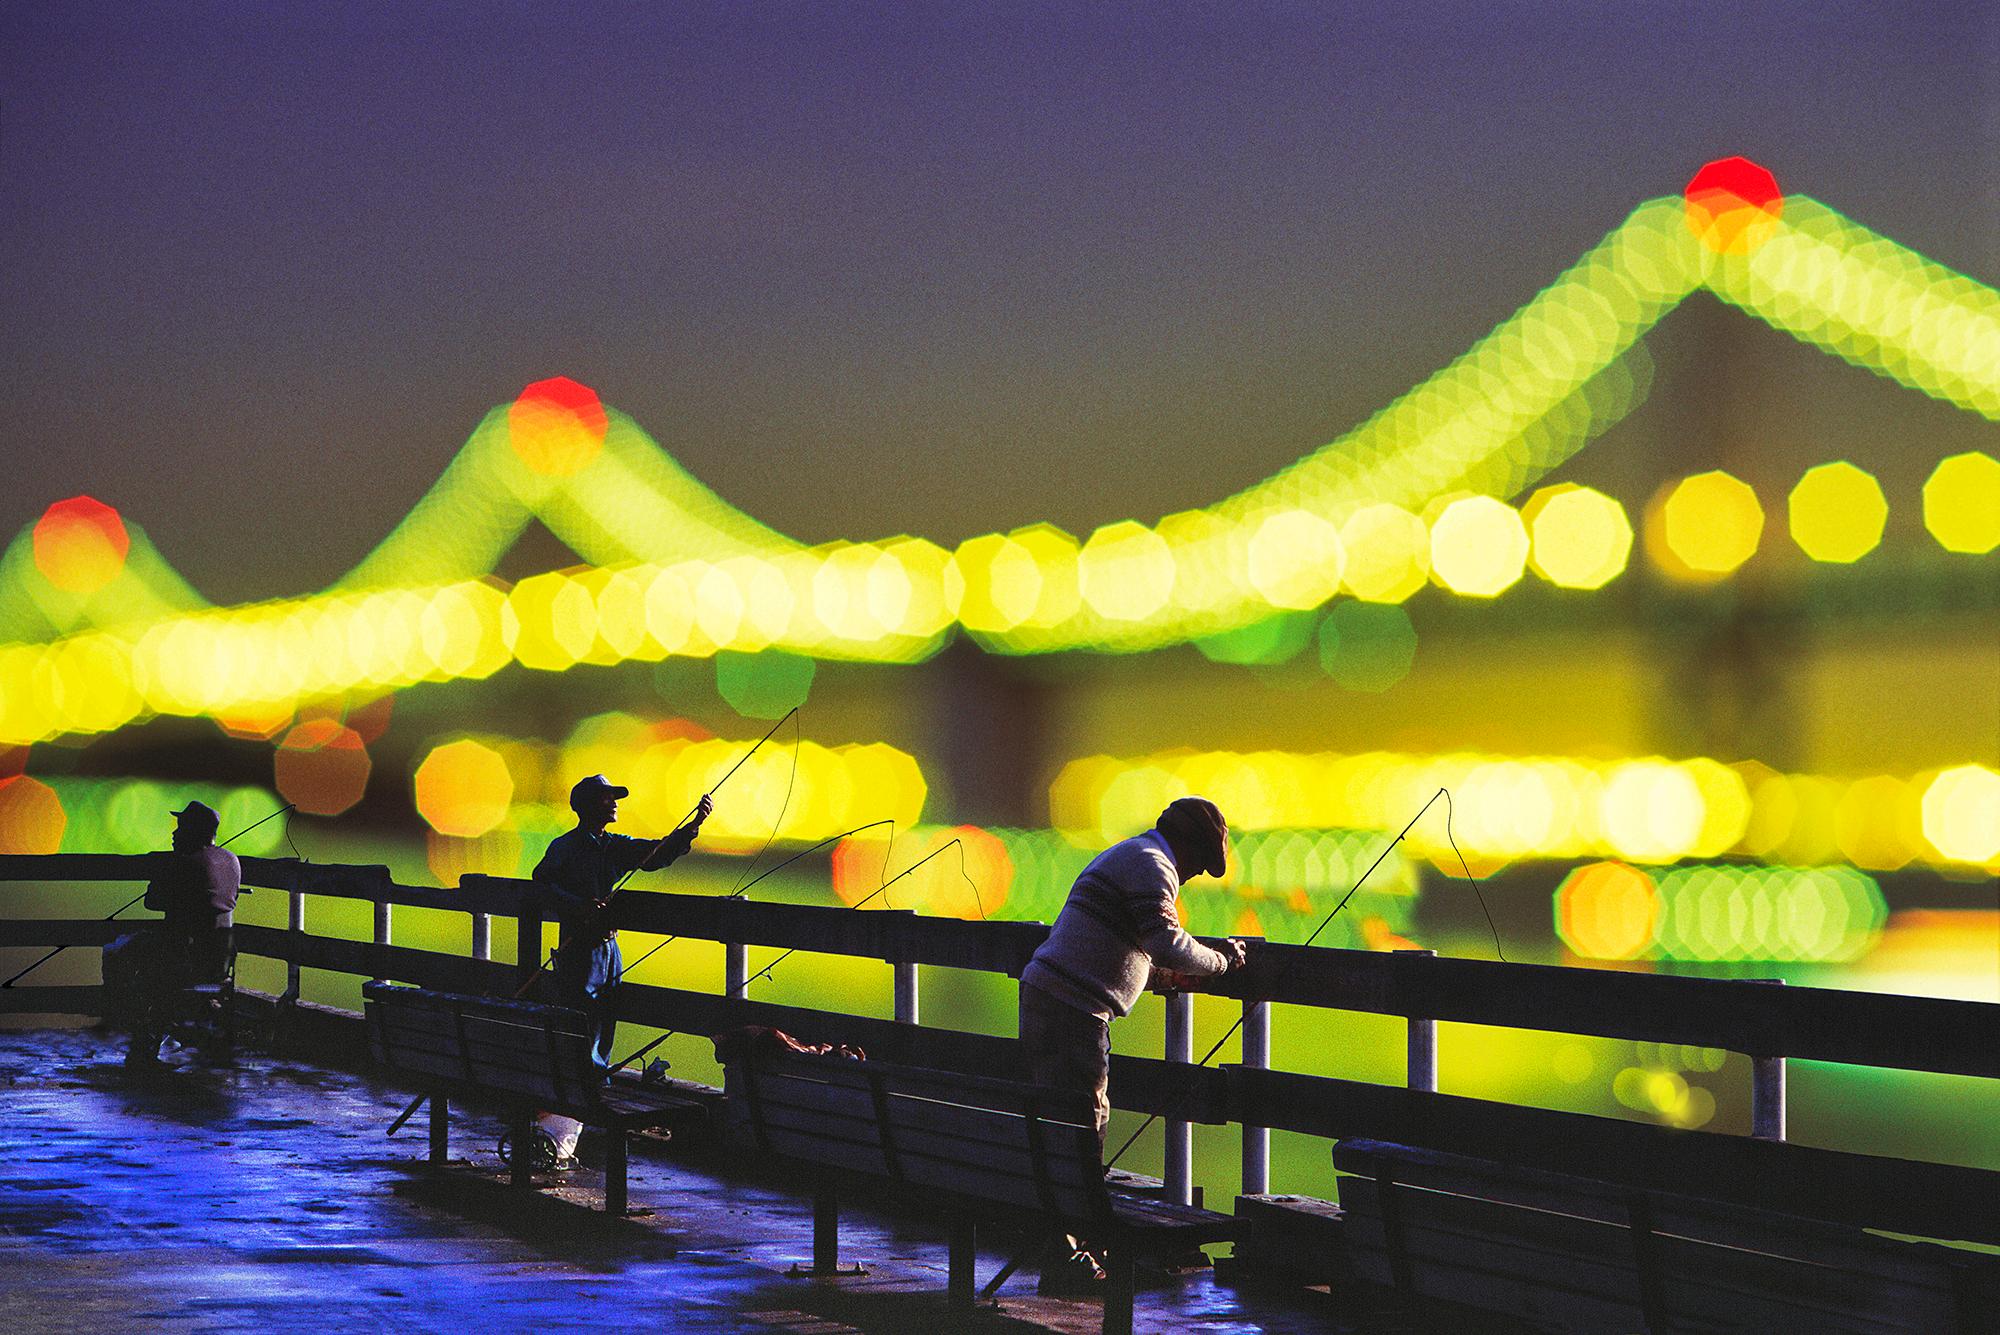 Mitchell Funk Landscape Photograph - We Are All Fisherman.   Figures and Out of Focus Lights San Francisco Bay Bridge